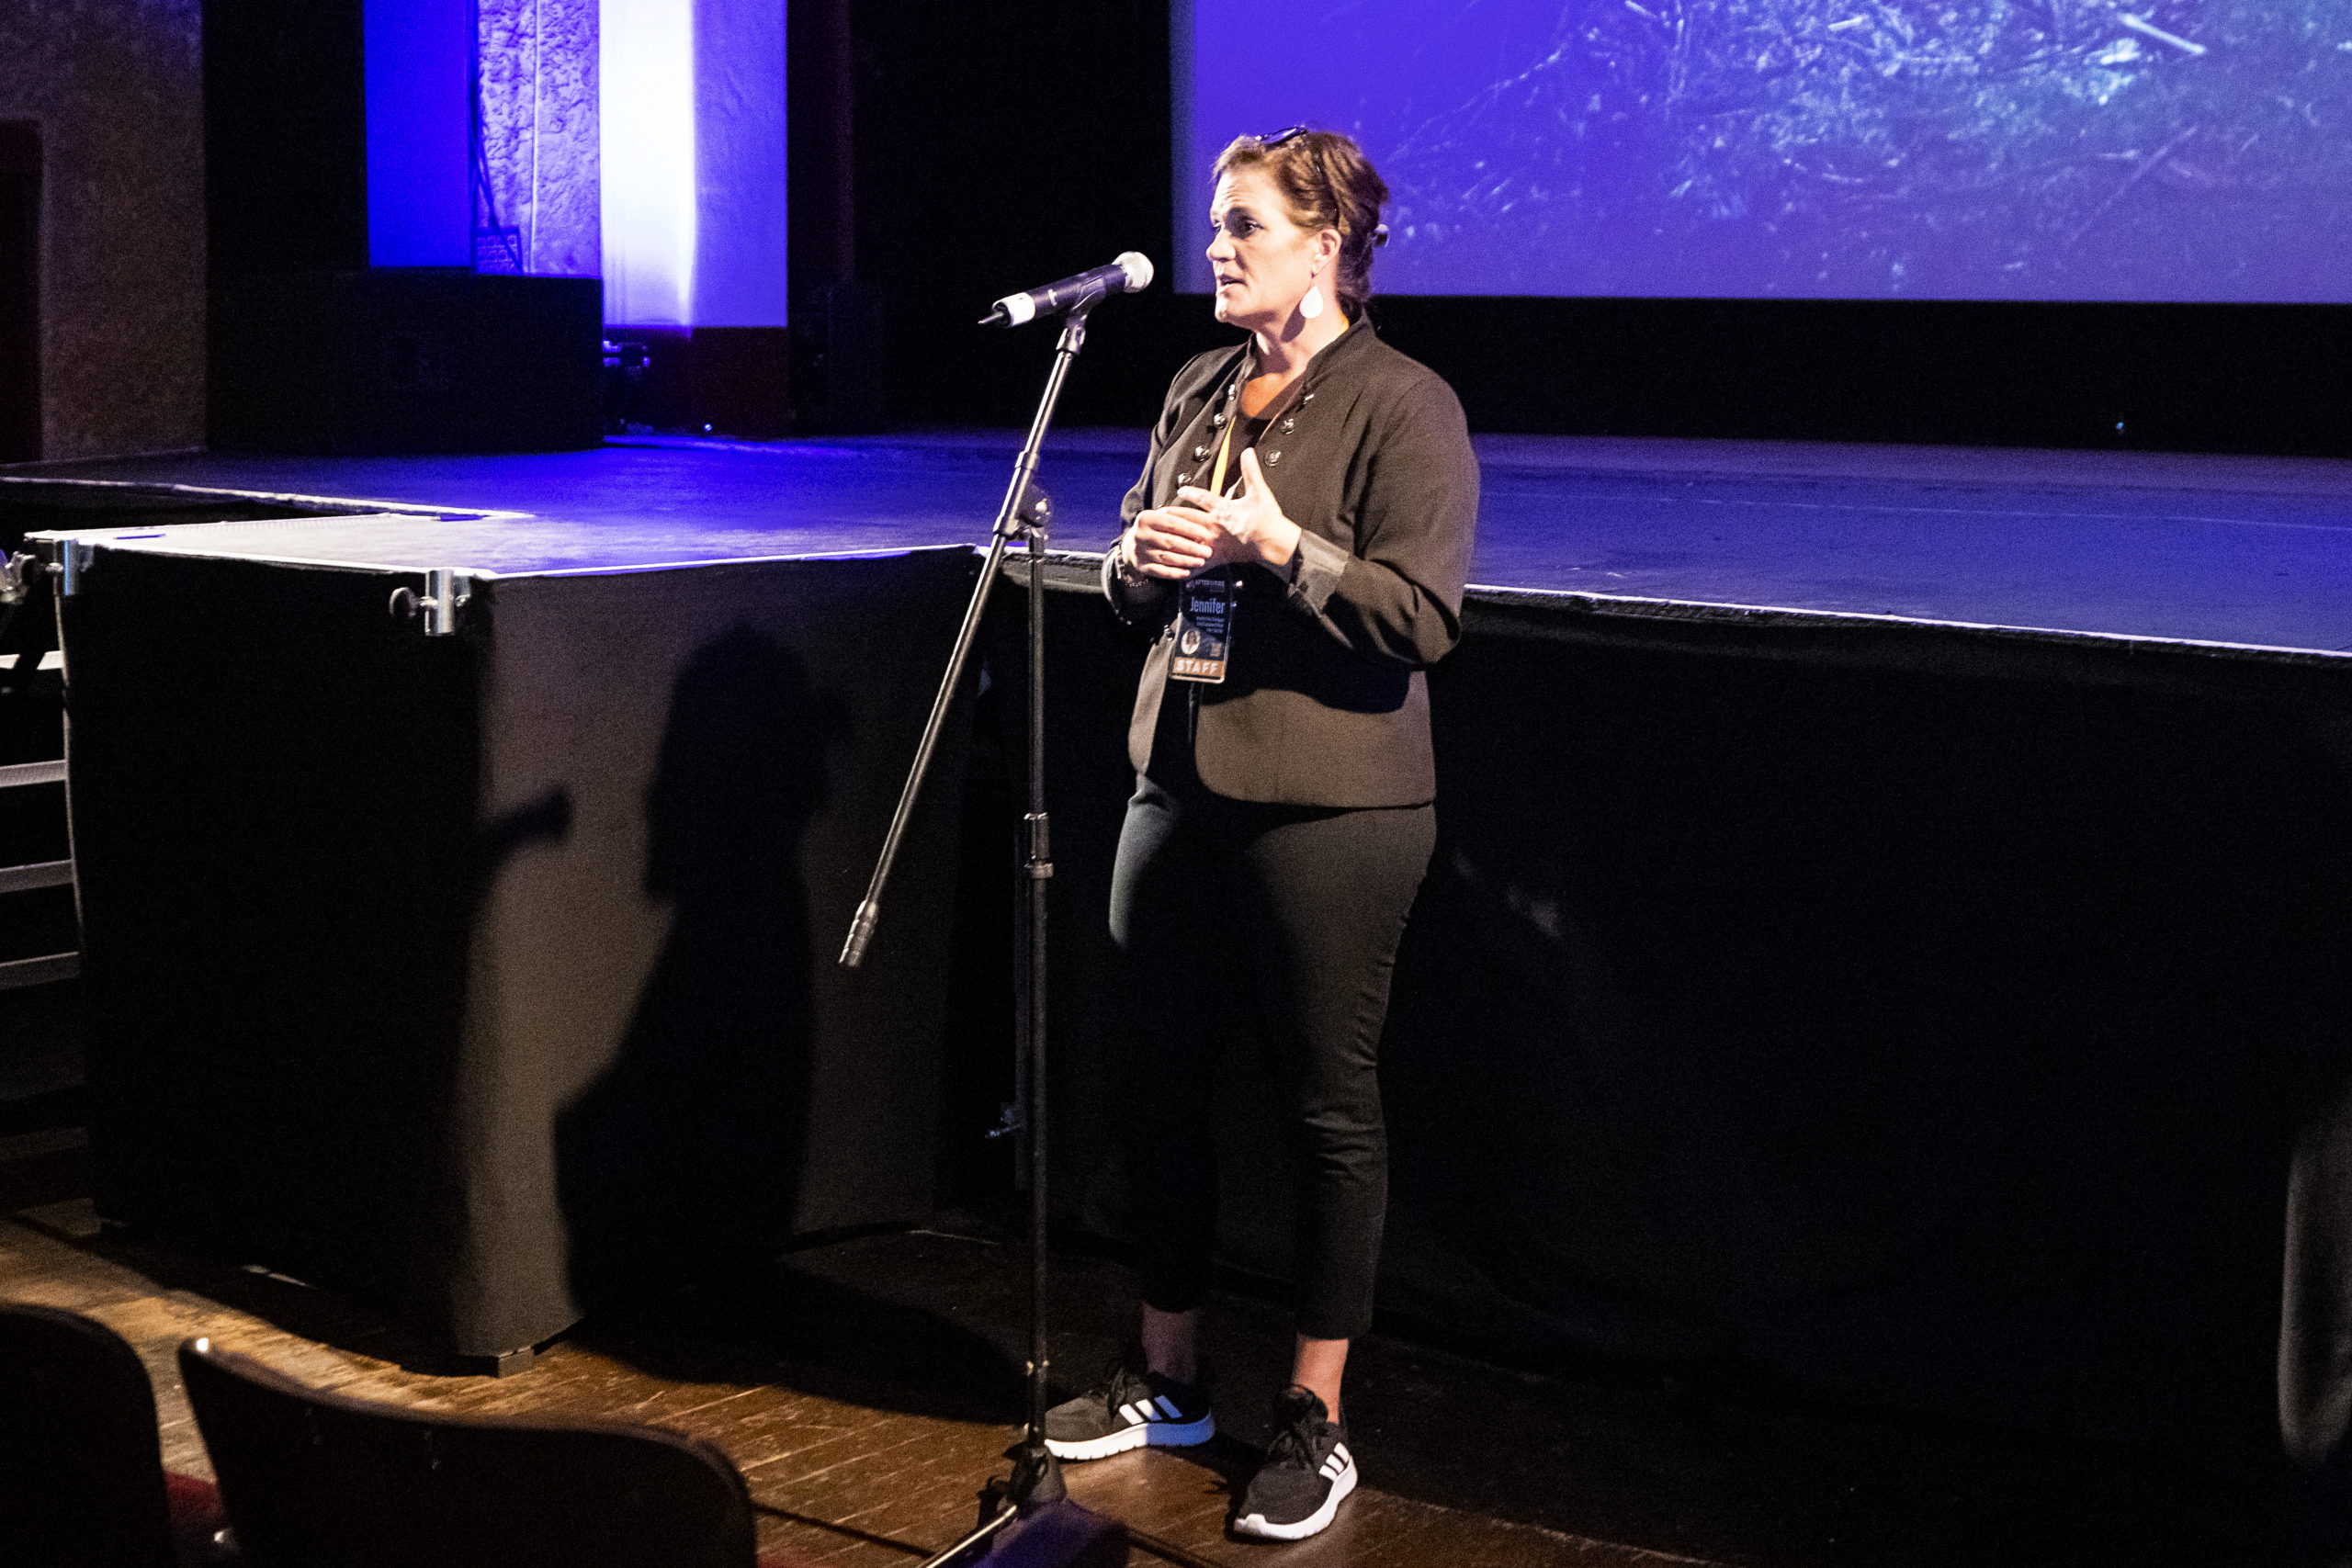 Woman speaking in a microphone in front of a darkened movie theater